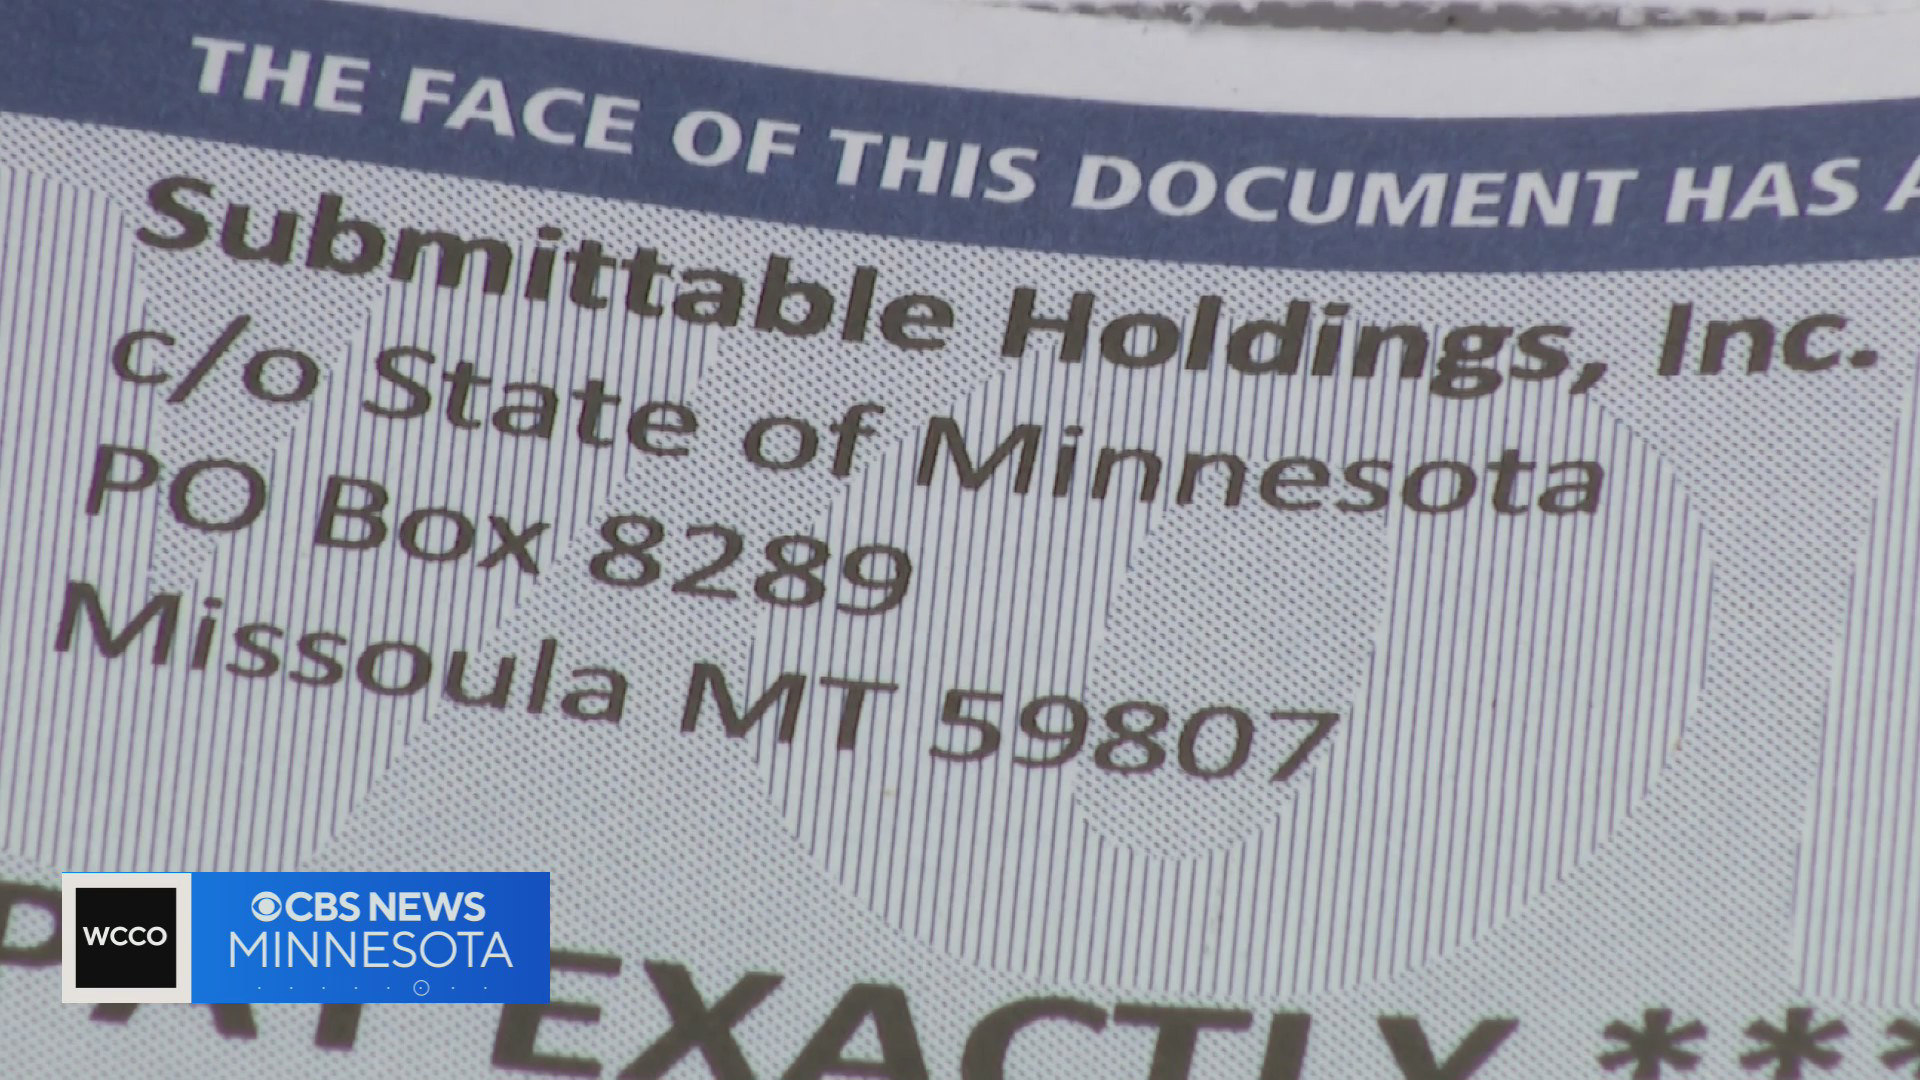 Waiting for you Minnesota rebate check? Don't be confused that it's